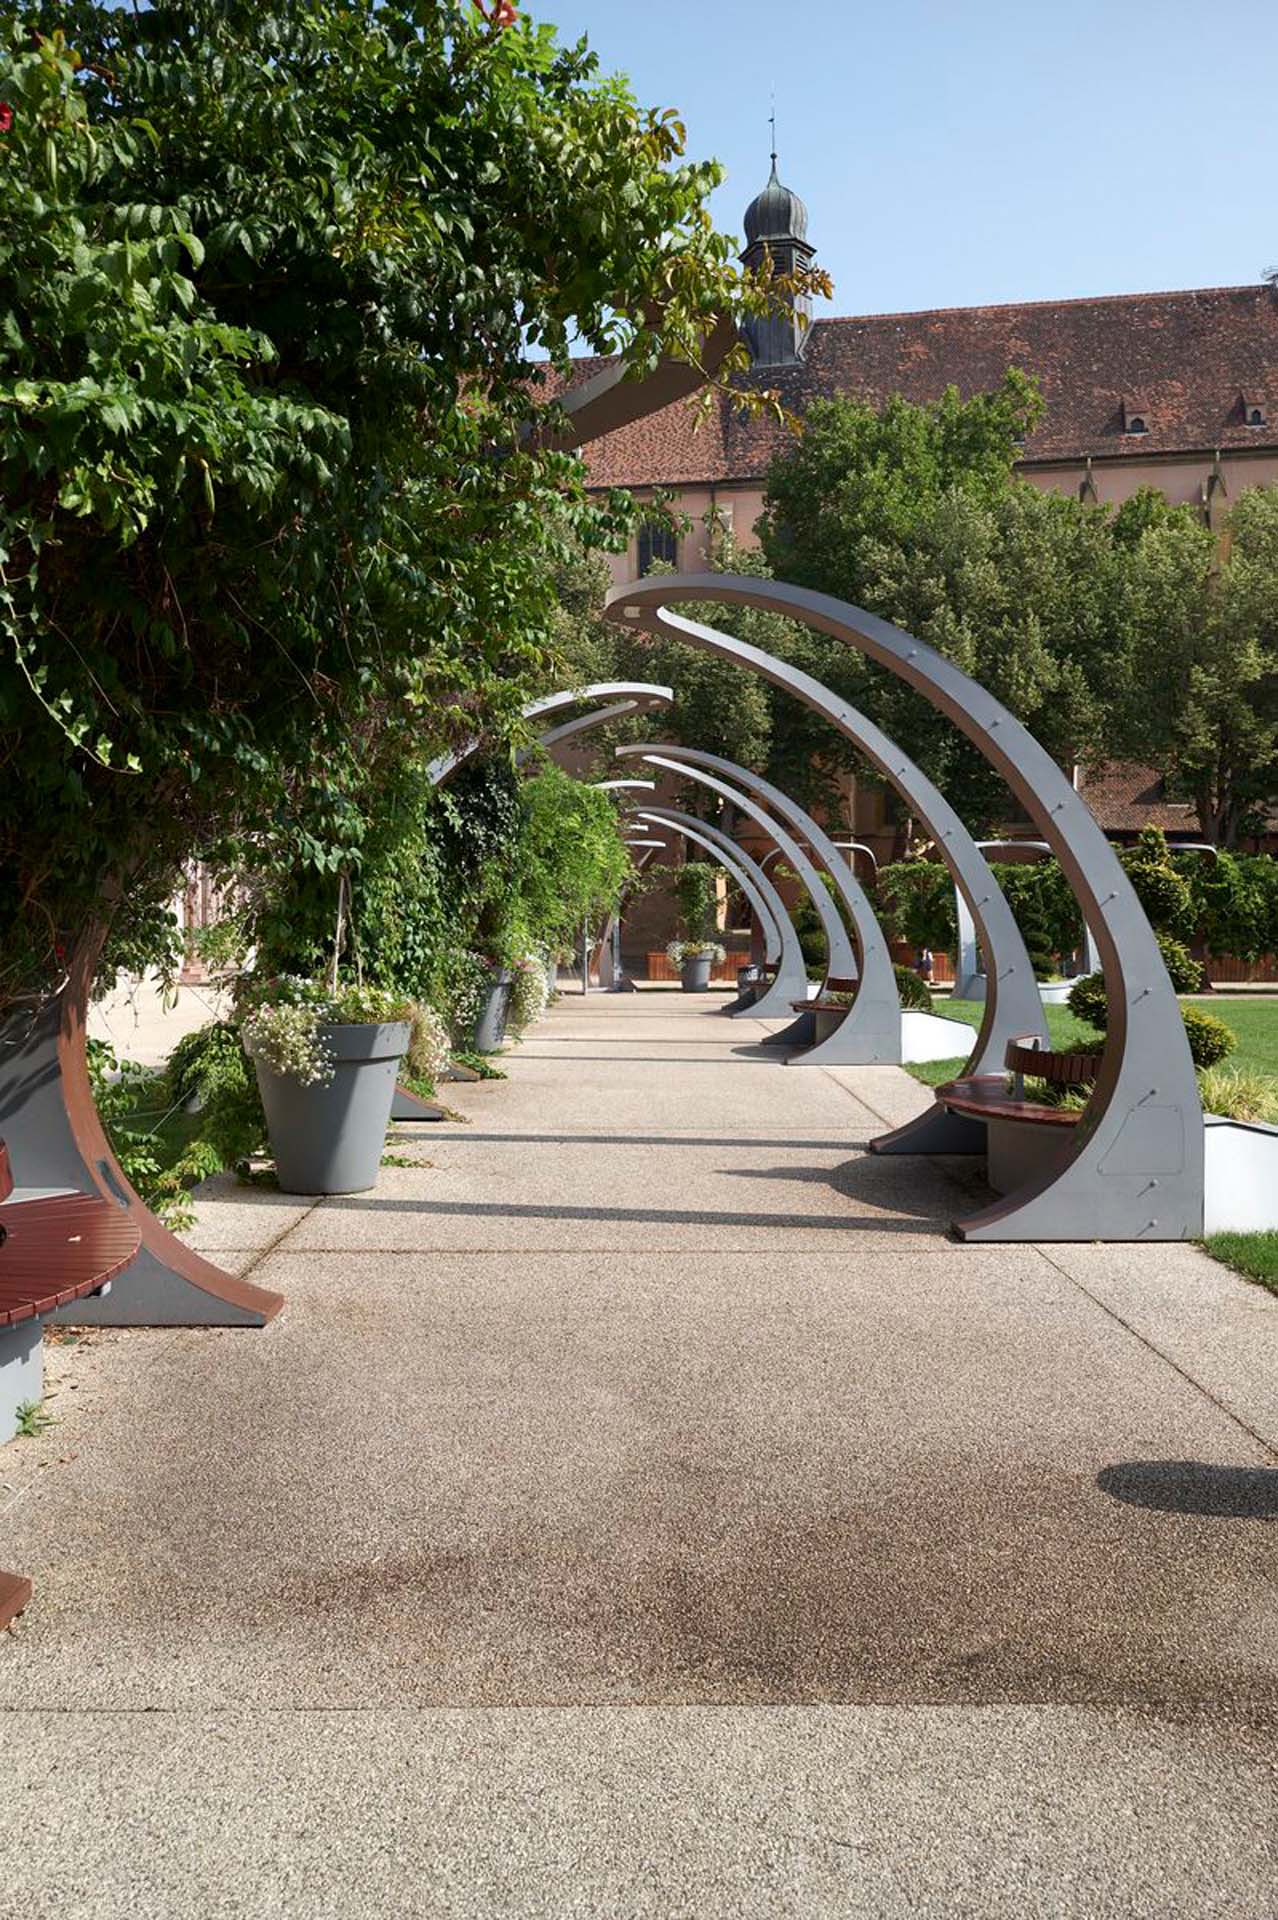 The Place de la Montagne Verte in Colmar, France, with a greening by Jakob Rope Systems